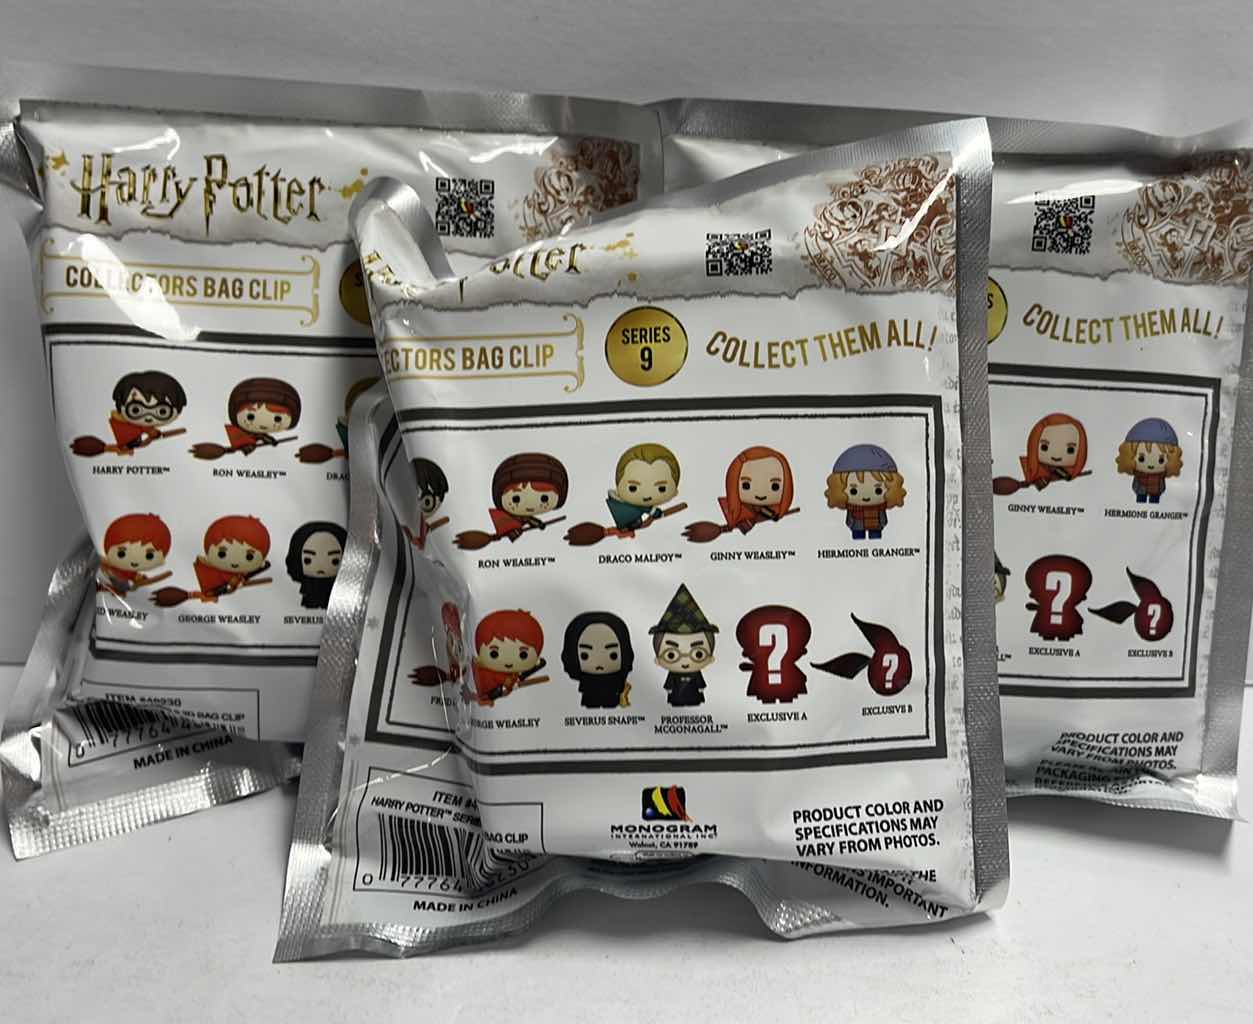 Photo 2 of NIB 3 HARRY POTTER SERIES 9 COLLECTORS BAG CLIPS - RETAIL PRICE $34.00